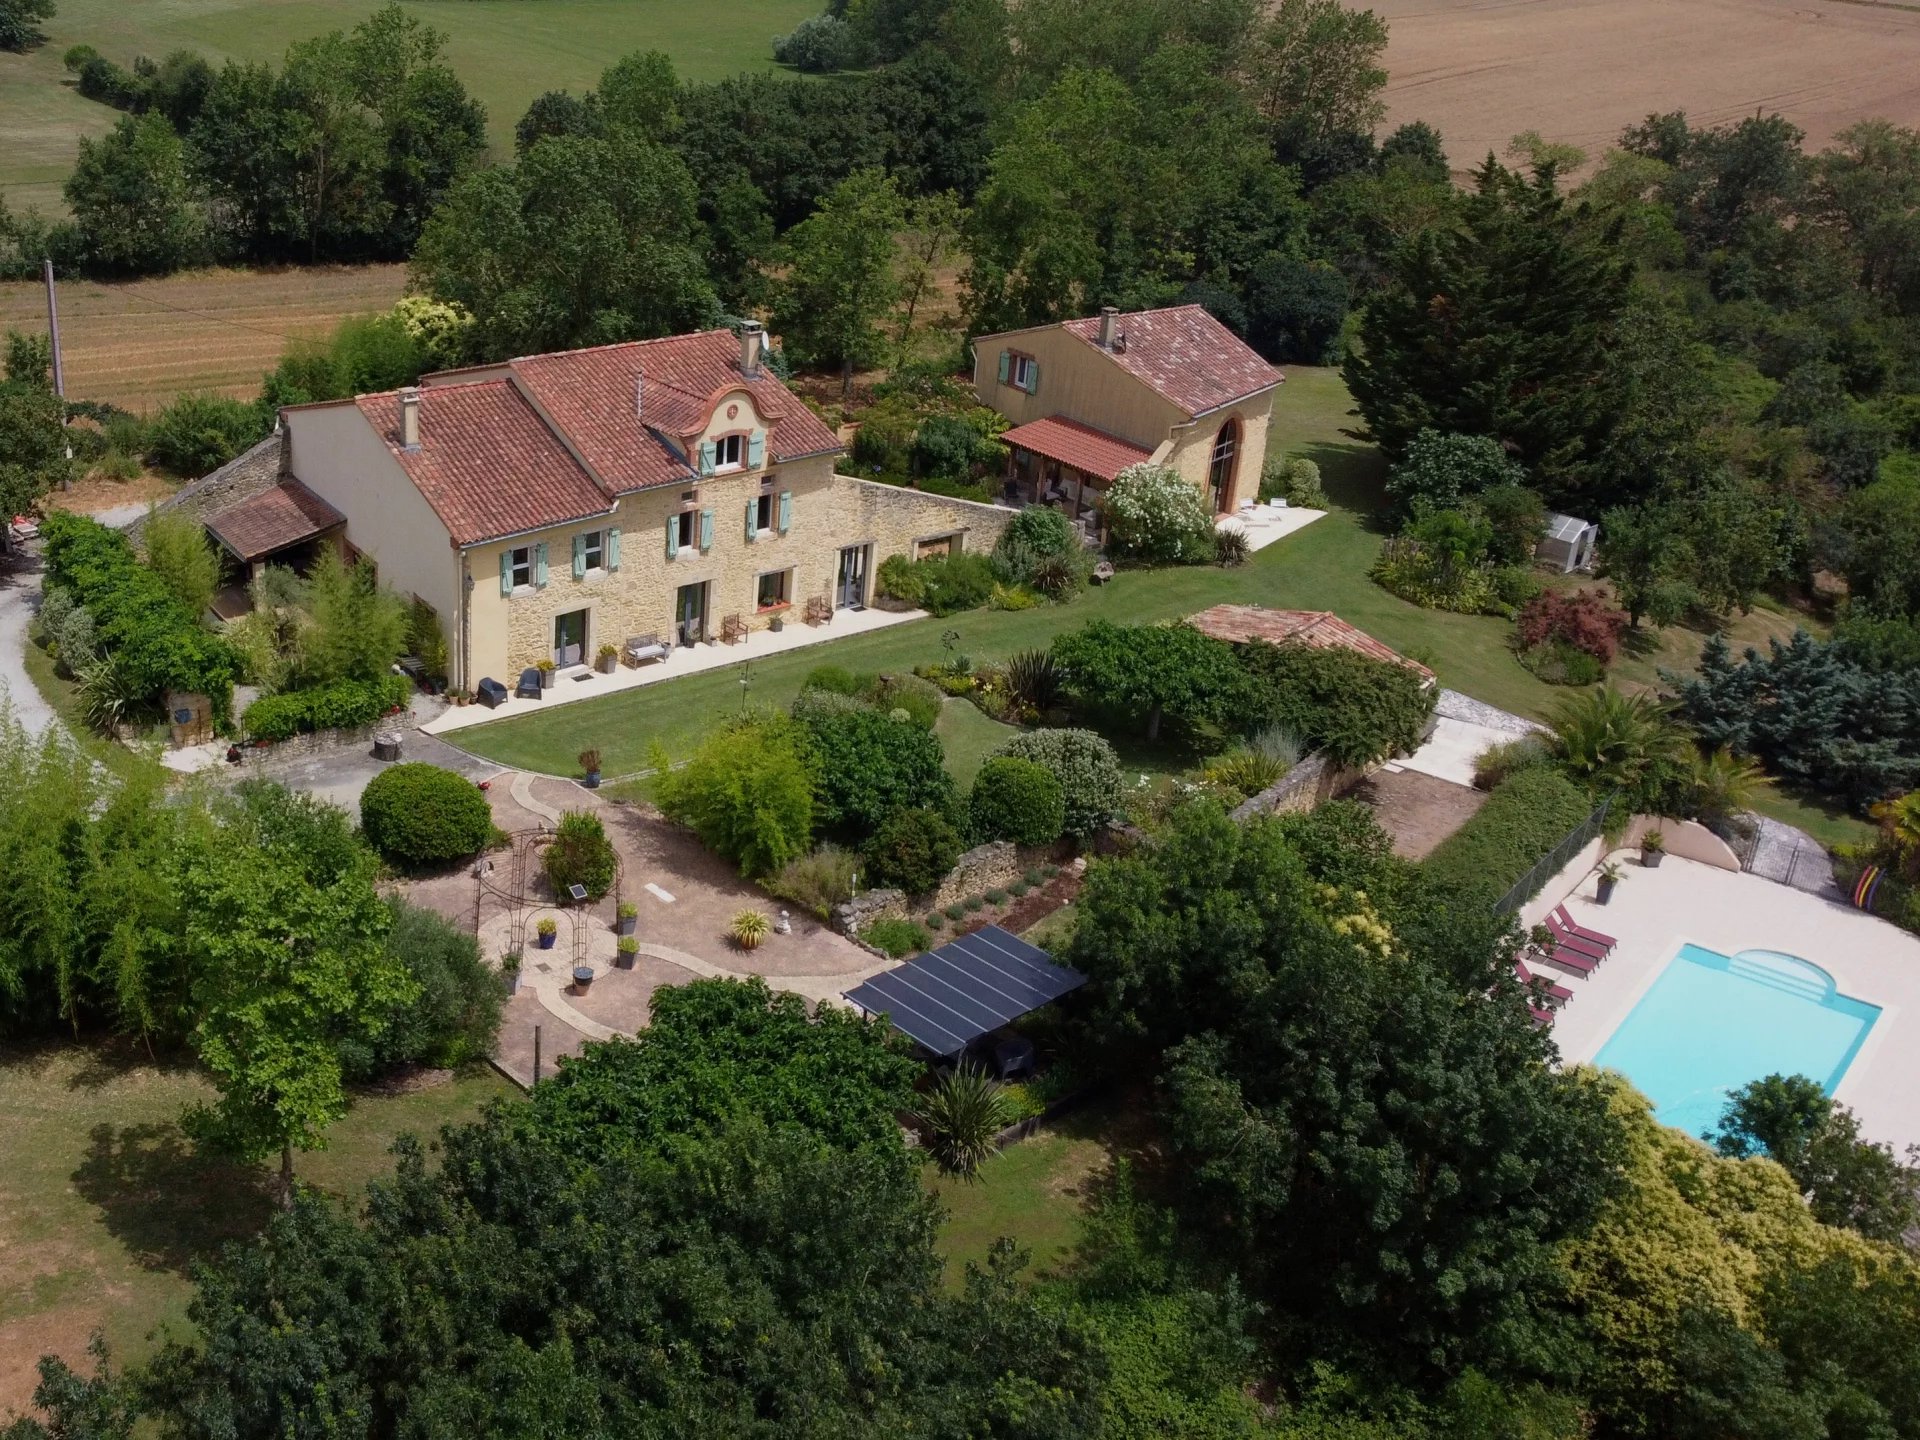 Renovated domaine of 3 houses, views of the Pyrenees, pool and fabulous garden